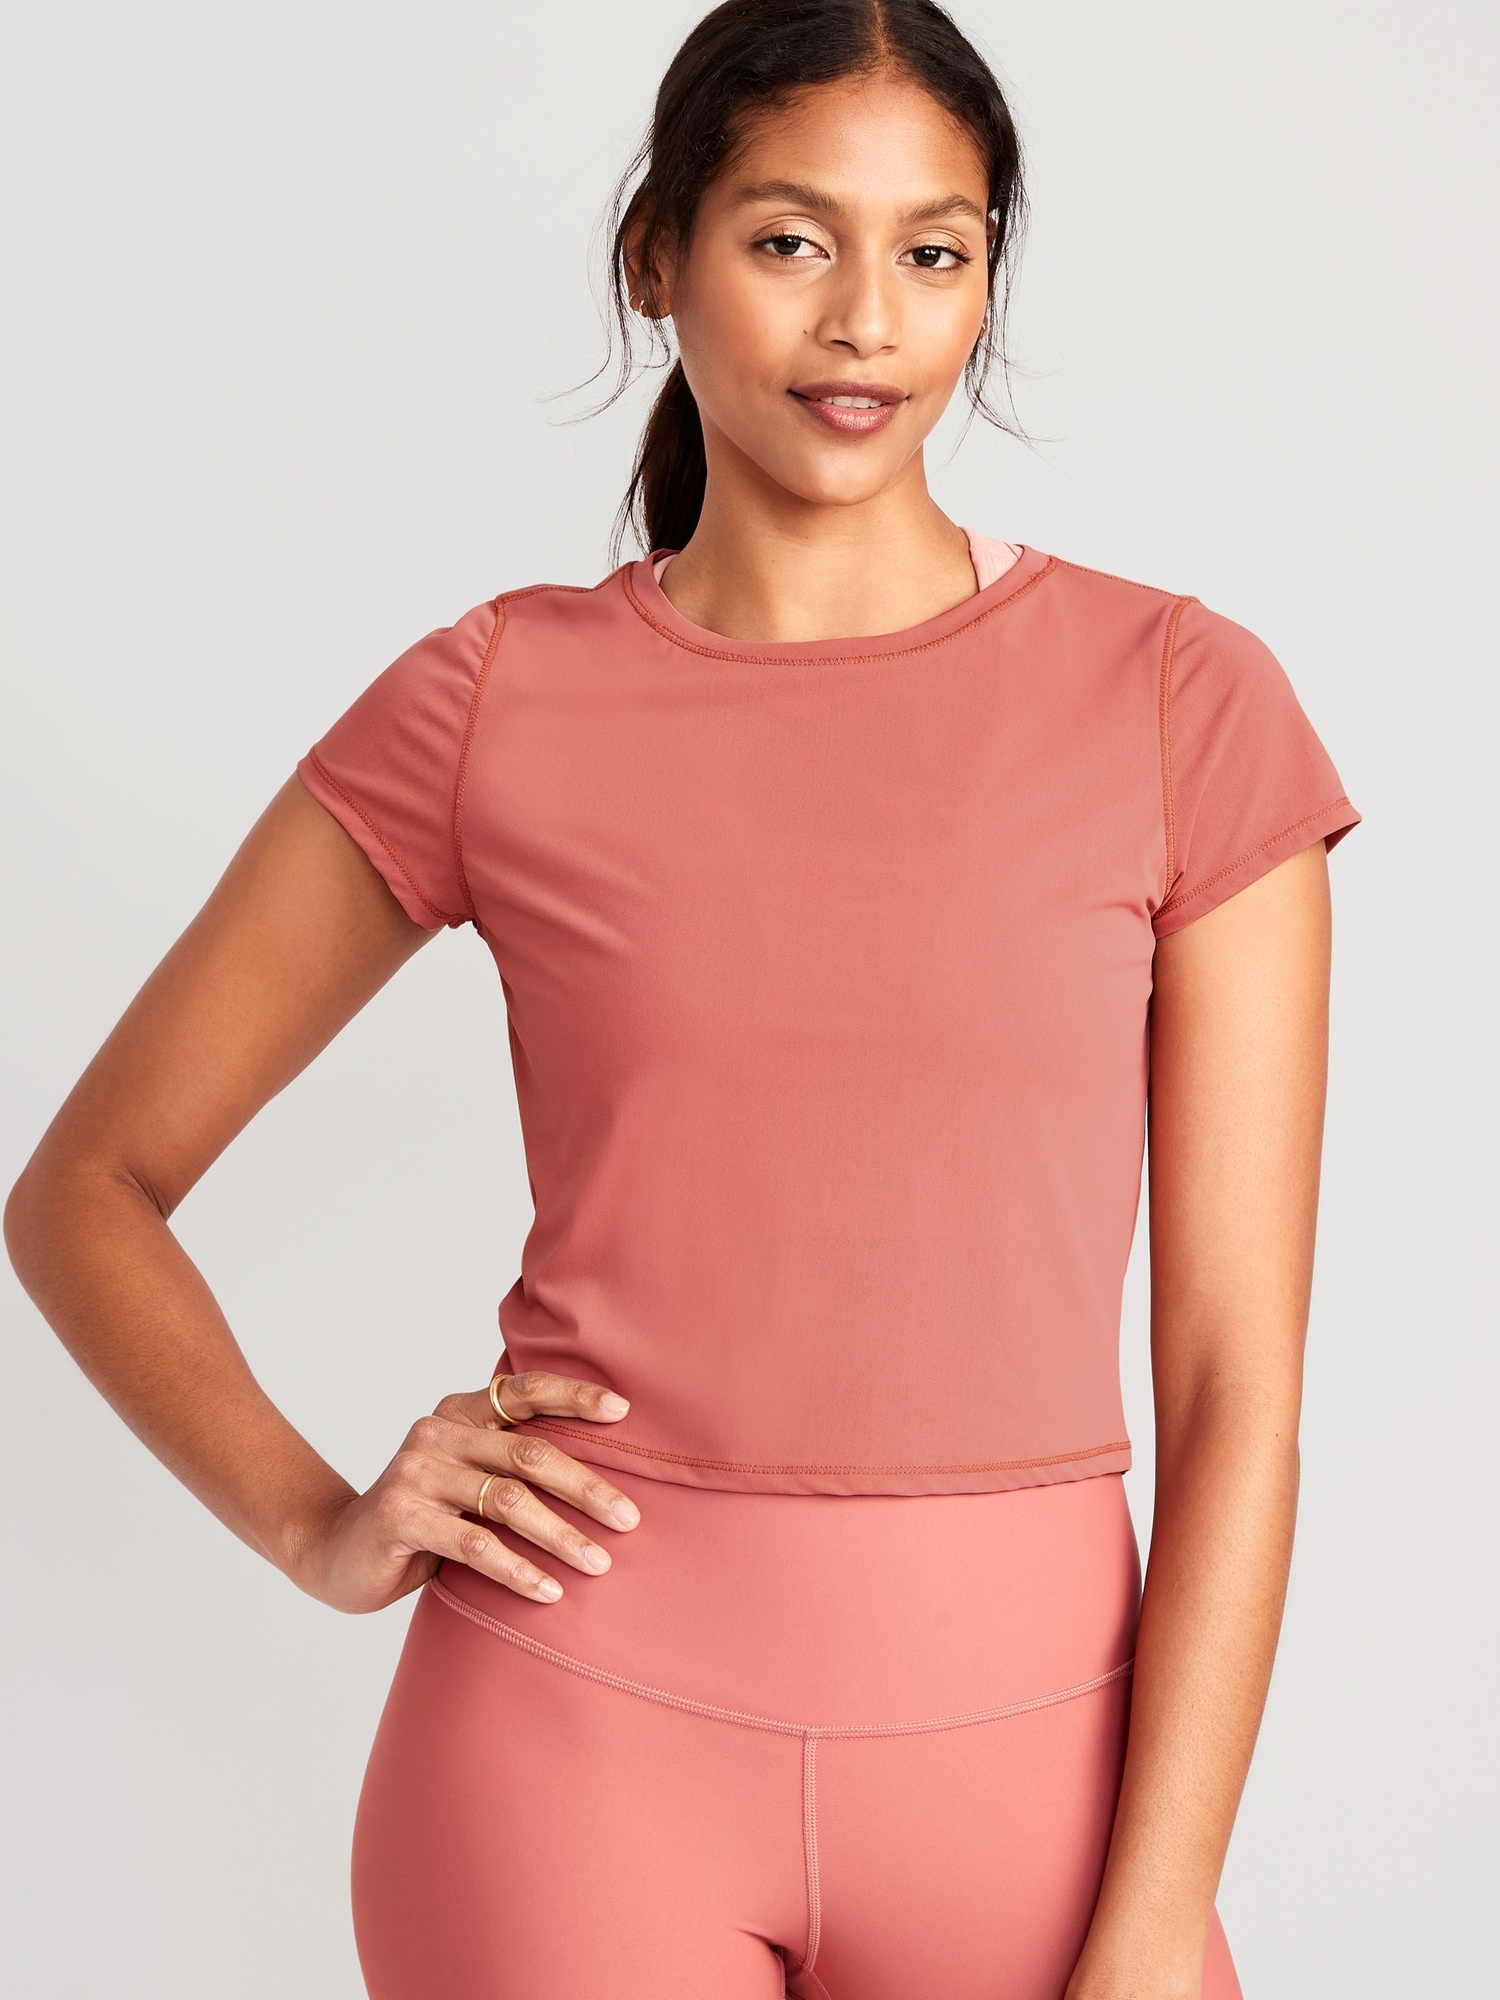 Old Navy PowerSoft Cropped T-Shirt for Women pink. 1